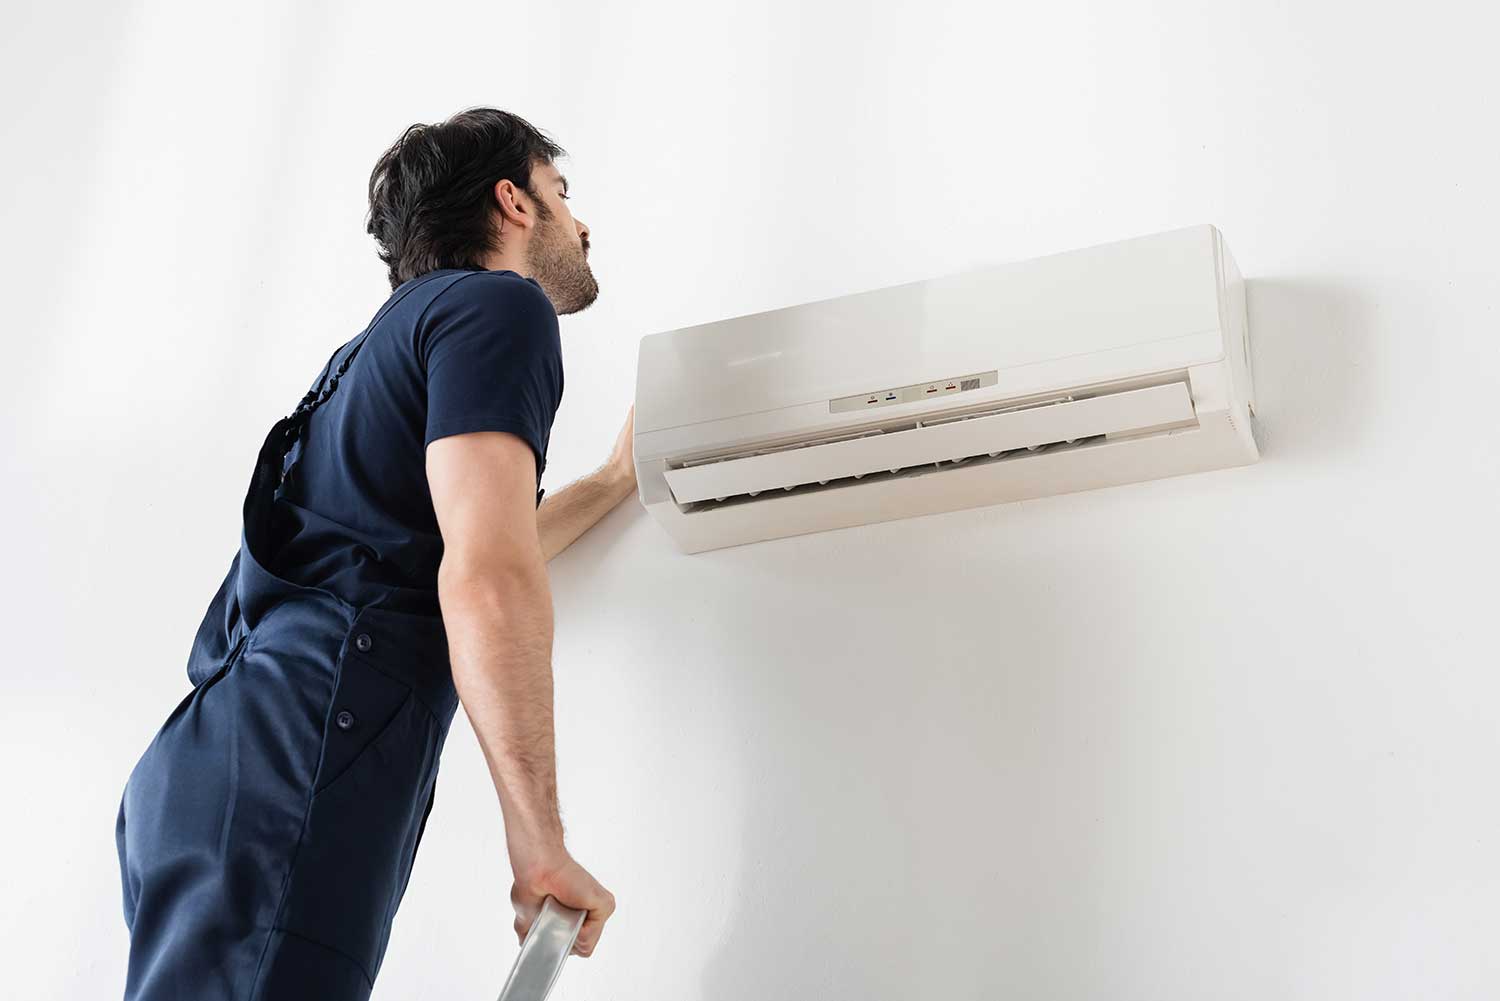 handyman in overalls standing on ladder while fixing broken air conditioner